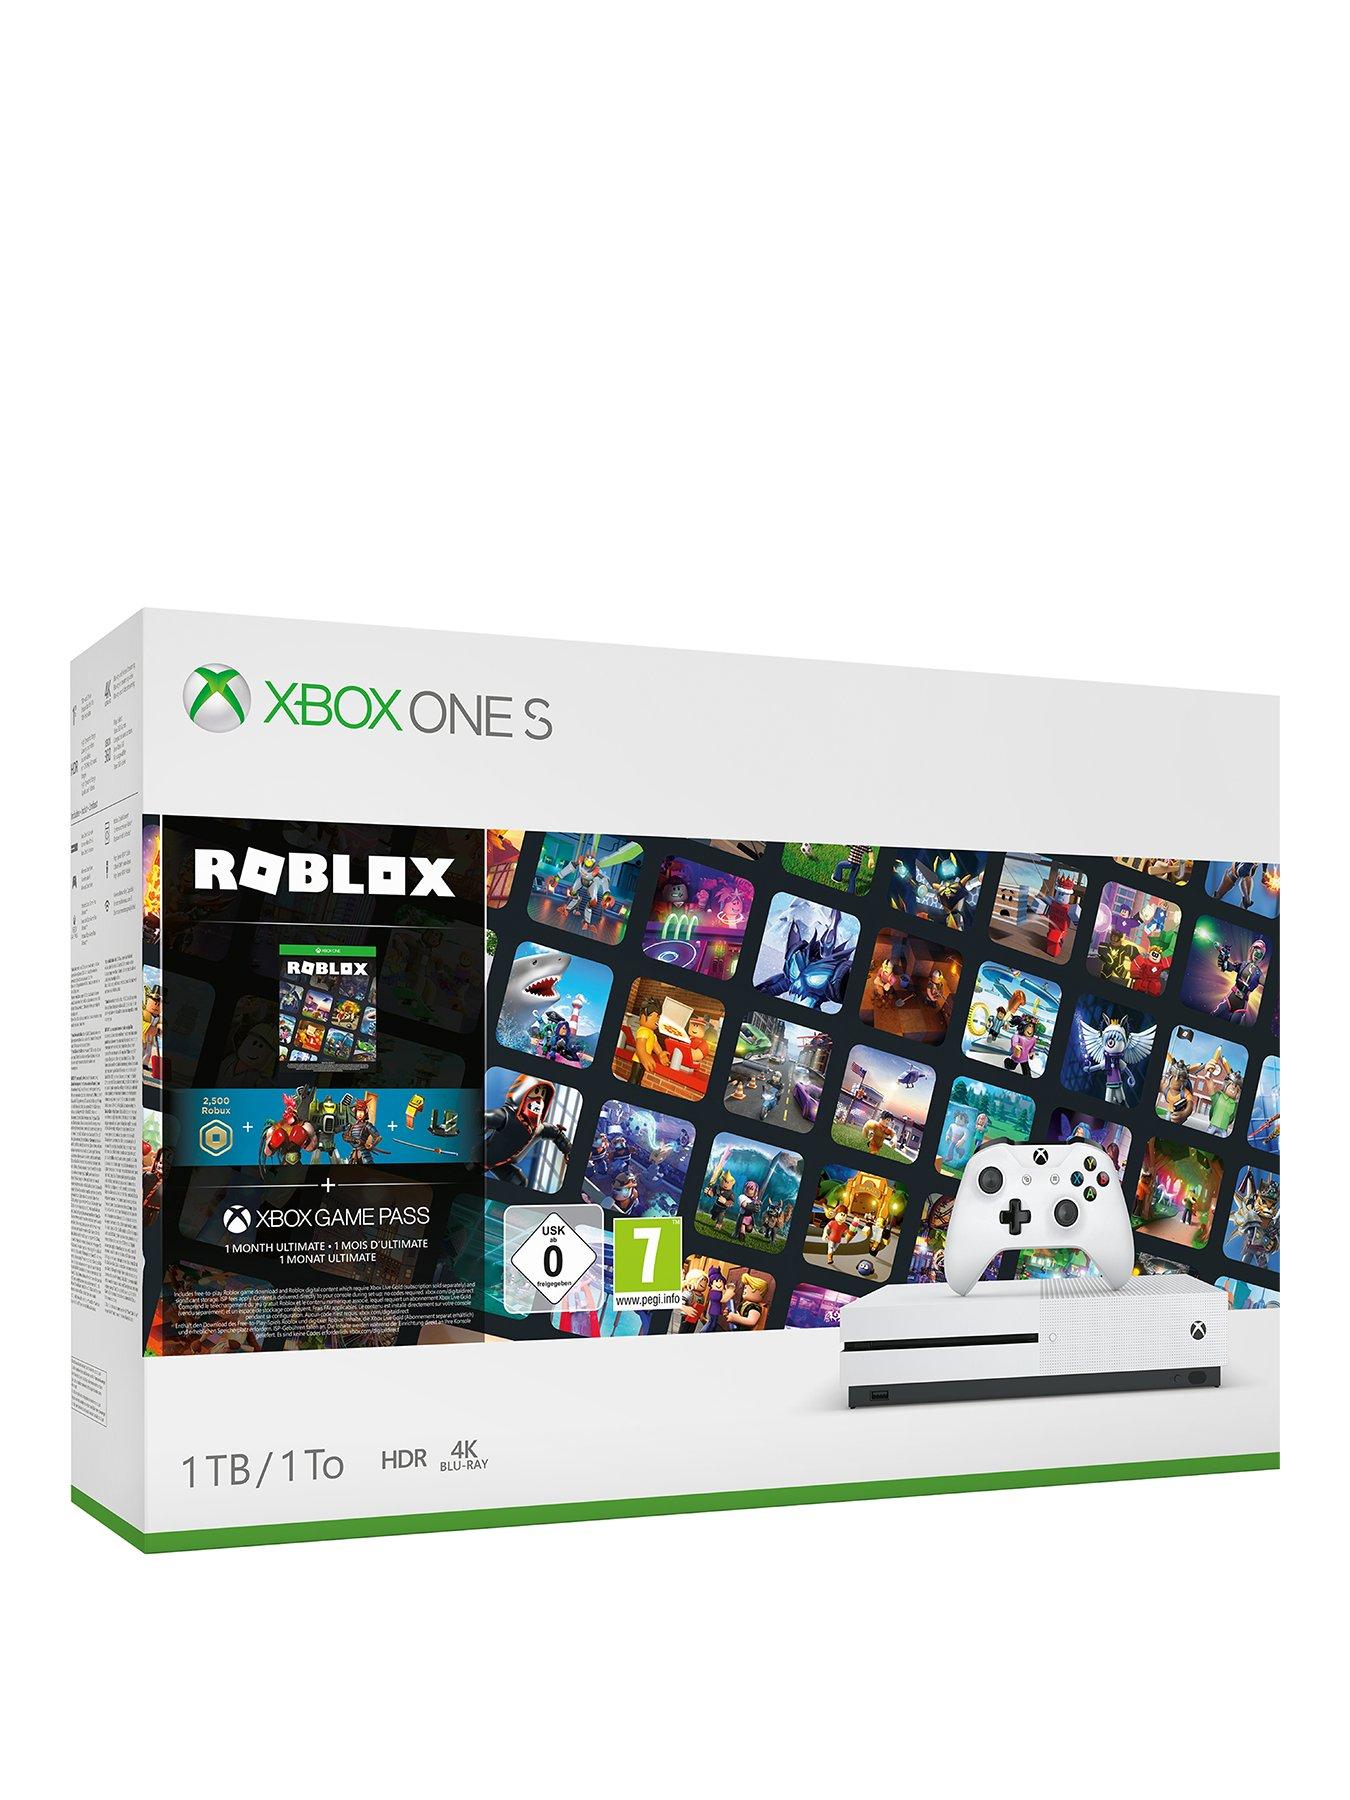 Xbox One S With Roblox Bundle And Optional Extras 1tb Console White Littlewoods Com - how to play roblox on xbox one s without gold